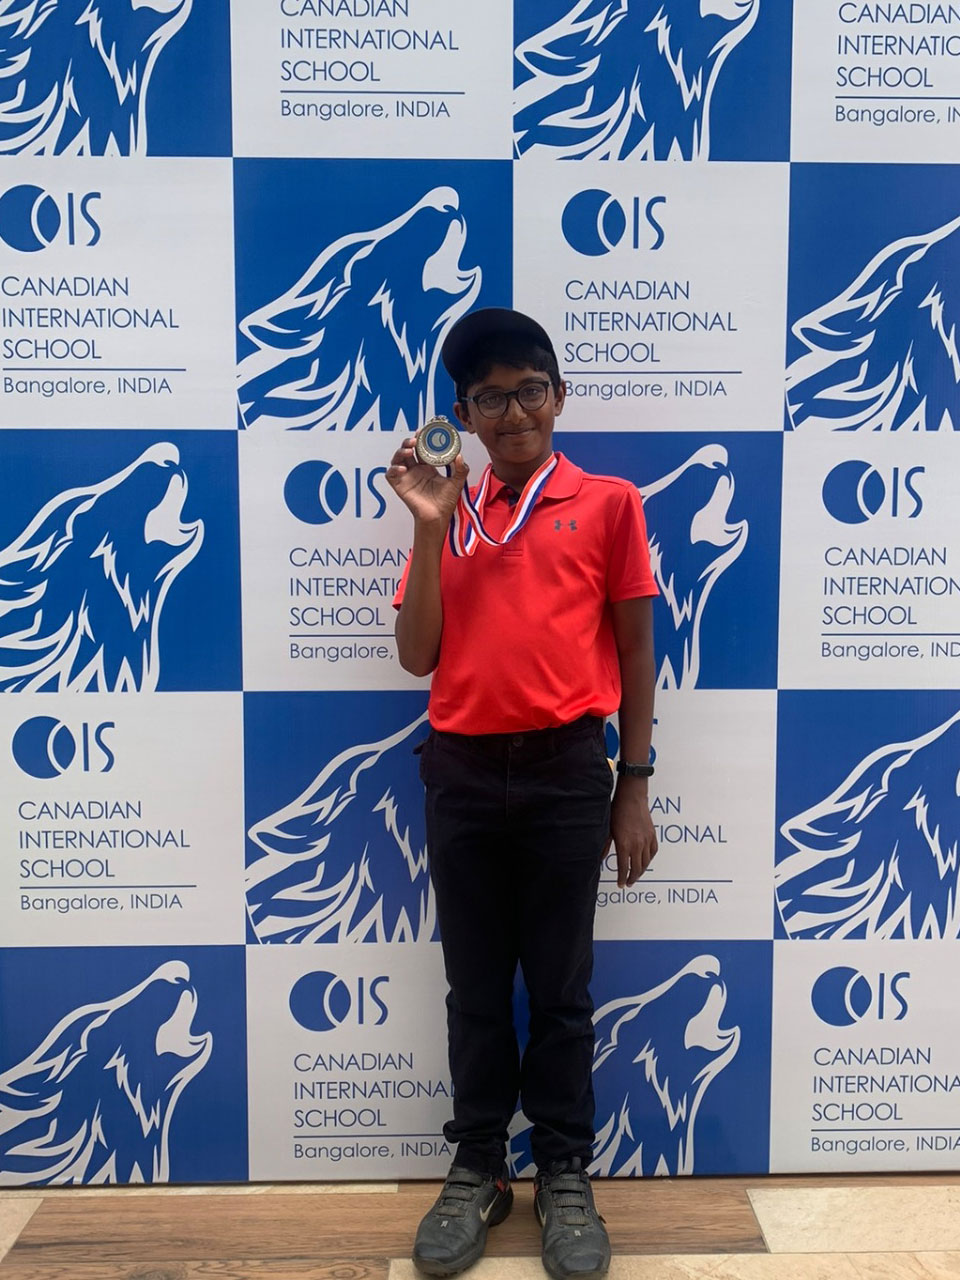 Nilofer Sivamoorthy finishes 2nd in Category B Boys at the CIS Inter School Championship